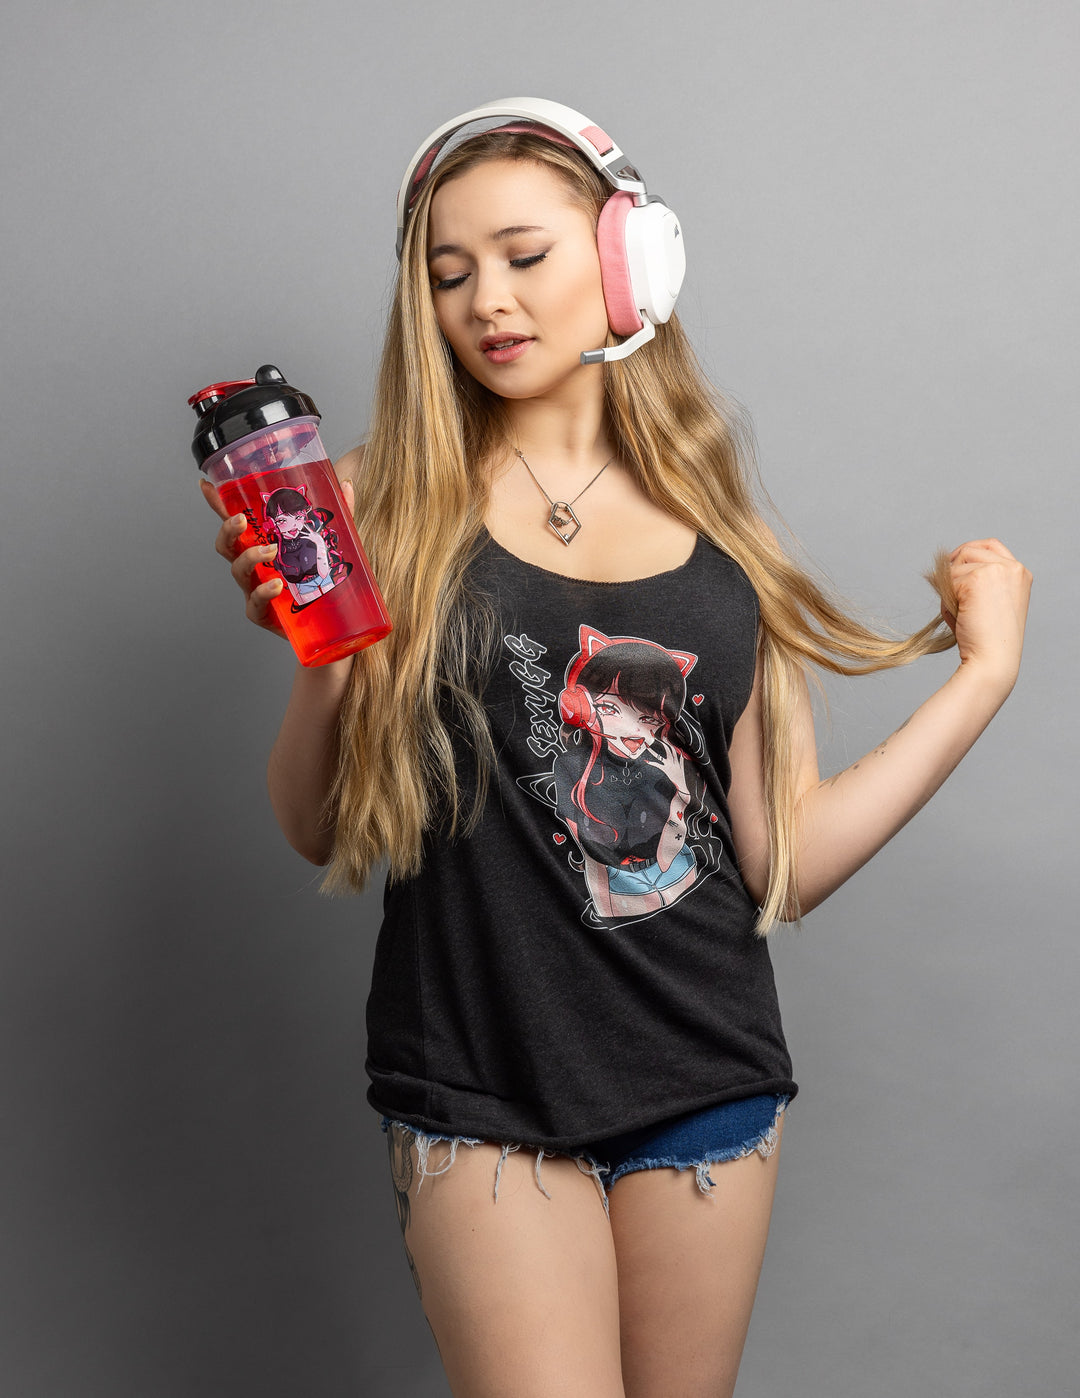 SexyGG Stream Dream Waifu Cup Anime Shaker Bottle For Gamers